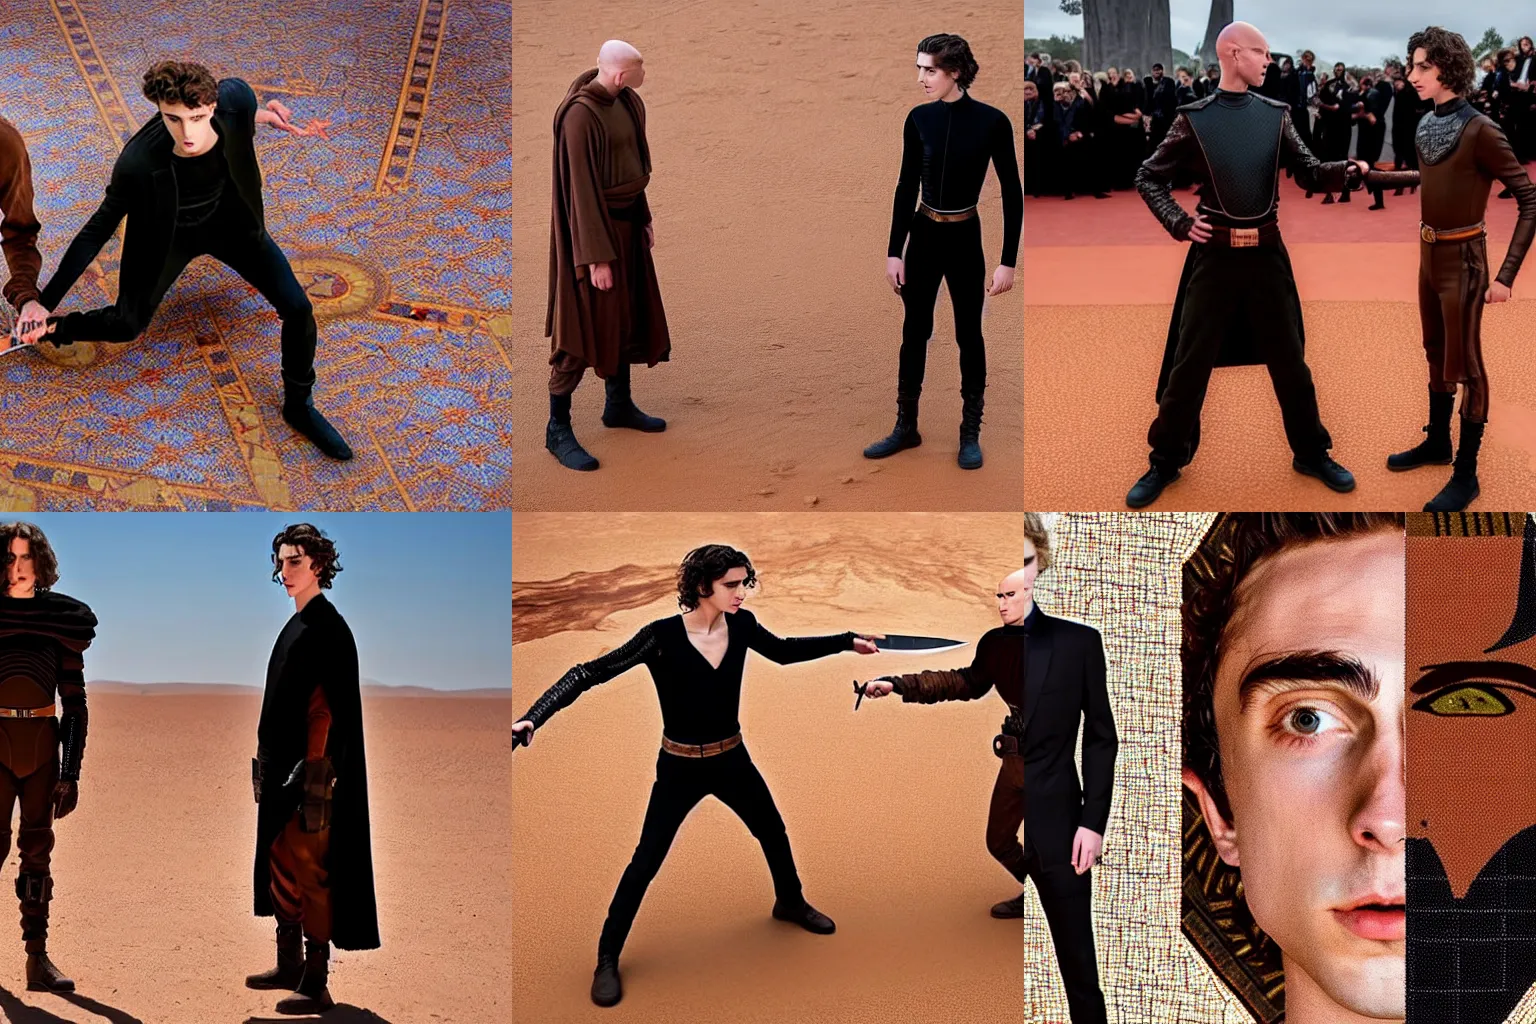 Prompt: knife-fight duel between bald_hairless_Austin_Butler-dressed-in-black and Timothee_Chalamet_dressed-in-brown-felt, on a mosaic floor, inspired by Dune 2020, detailed faces